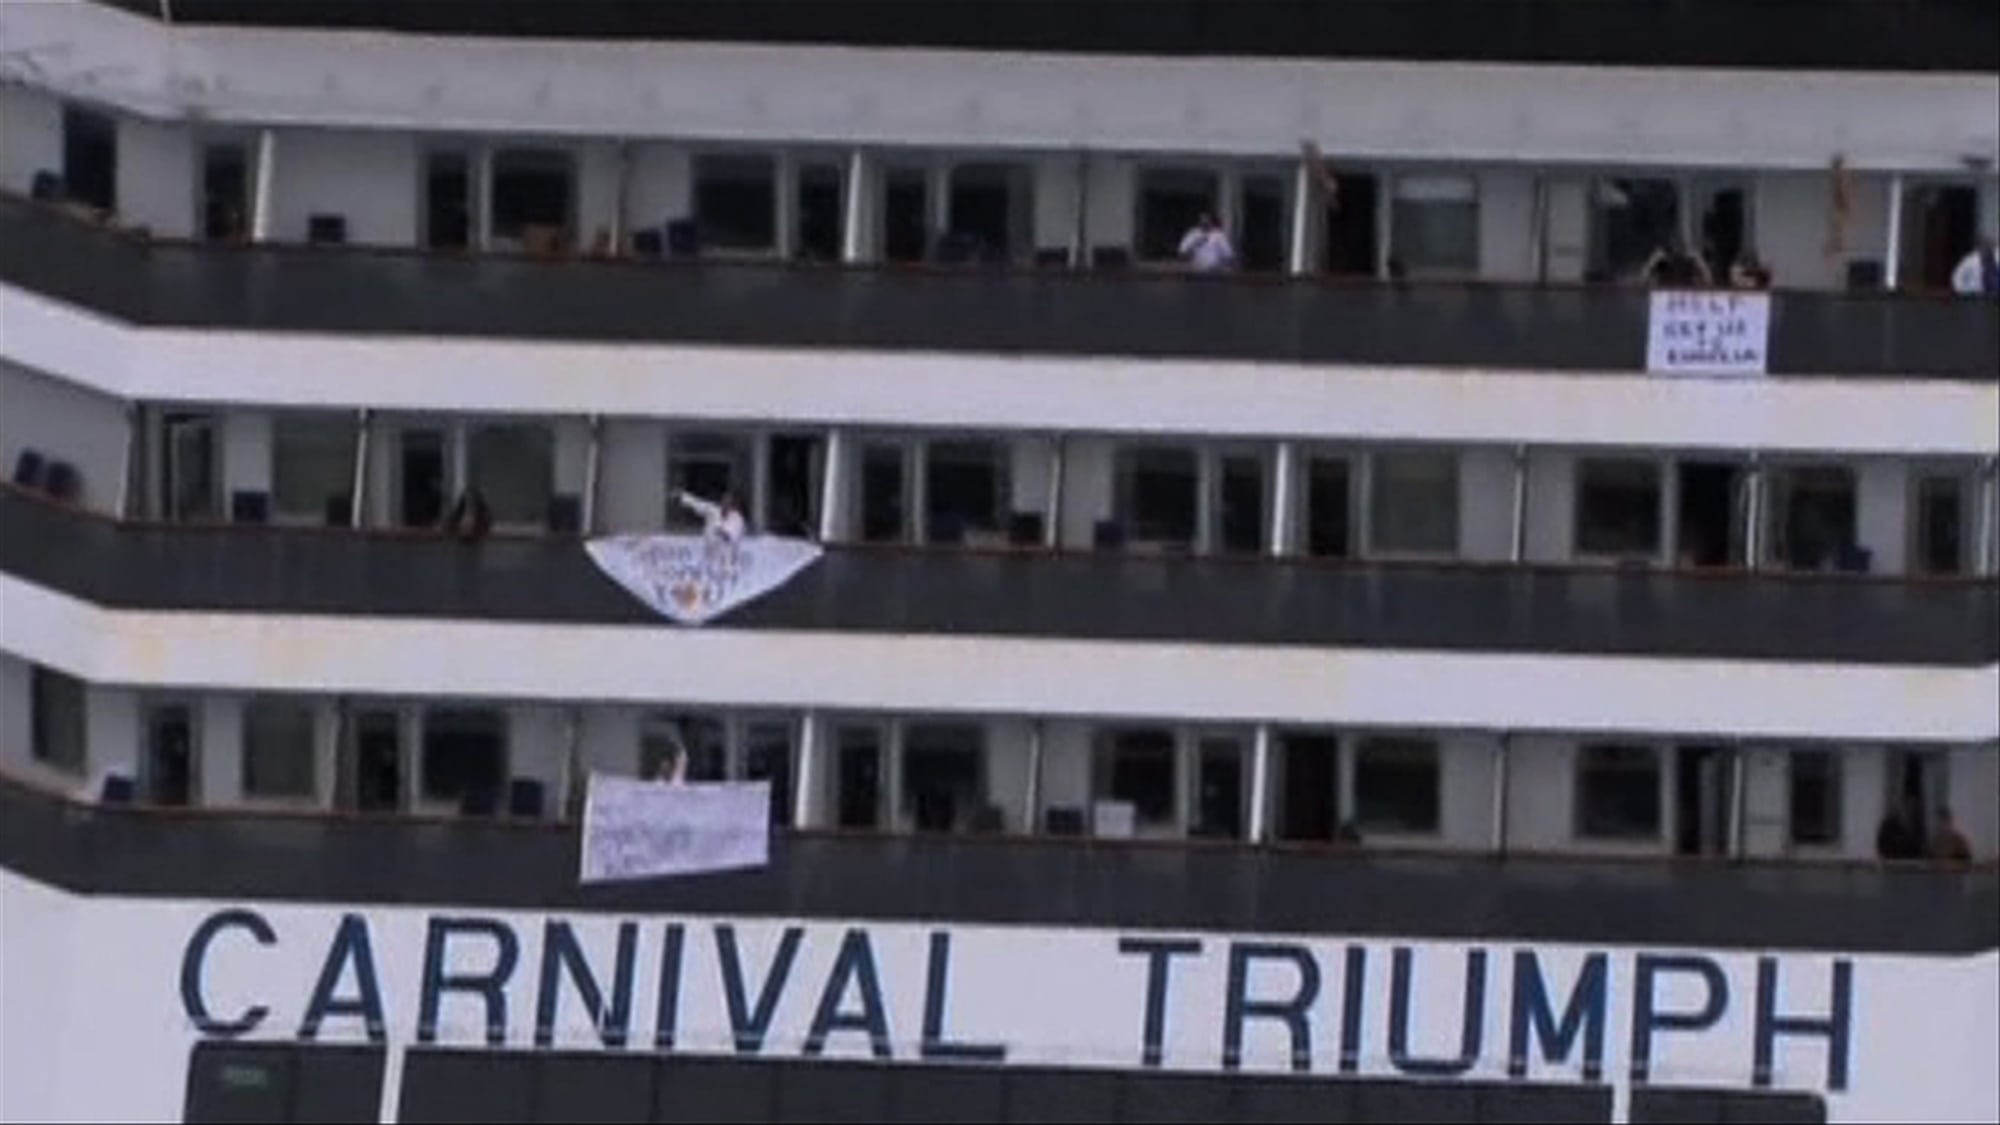 People wave and hang signs at the side of their balconies on the cruise ship Carnival Triumph cruise ship in this video frame grab from NBC News taken off the coast of Alabama, February 14, 2013. Three tugboats were hauling the disabled cruise ship Carnival Triumph cruise ship slowly into port in Mobile, Alabama, on Thursday where its arrival with more than 4,220 people aboard was expected later in the day, authorities said.